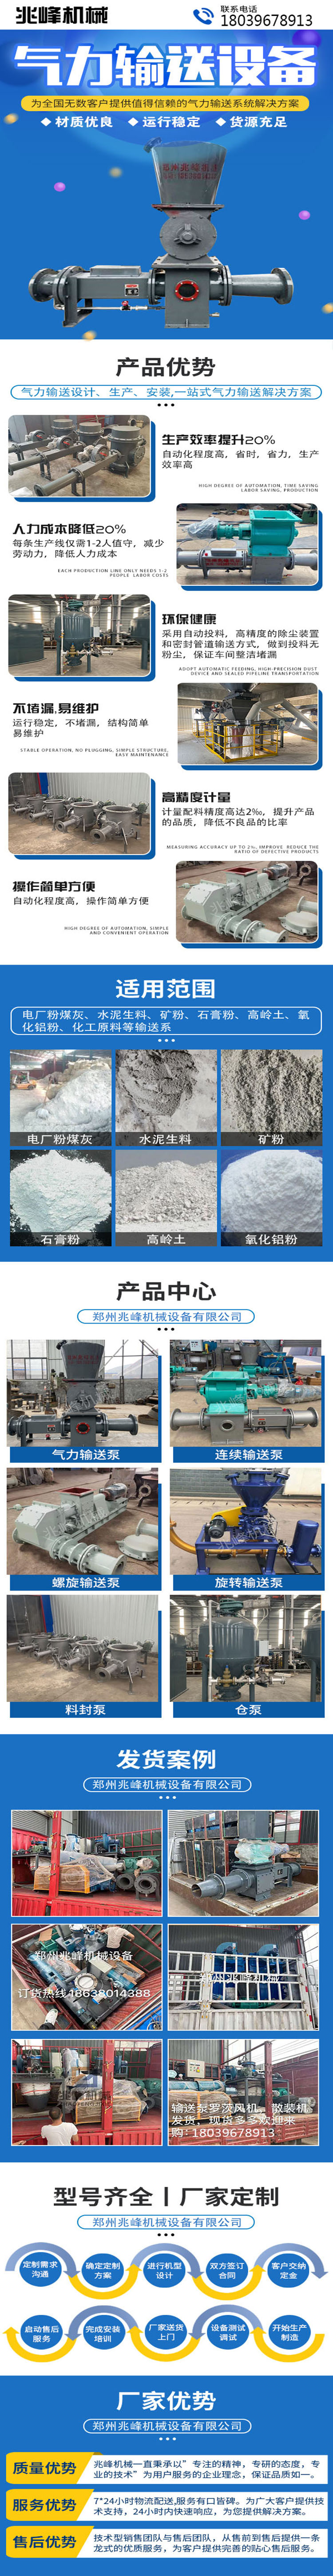 Zhaofeng brand dilute phase conveying material sealing pump, continuous conveying air blowing pump, fly ash pneumatic conveying pump equipment